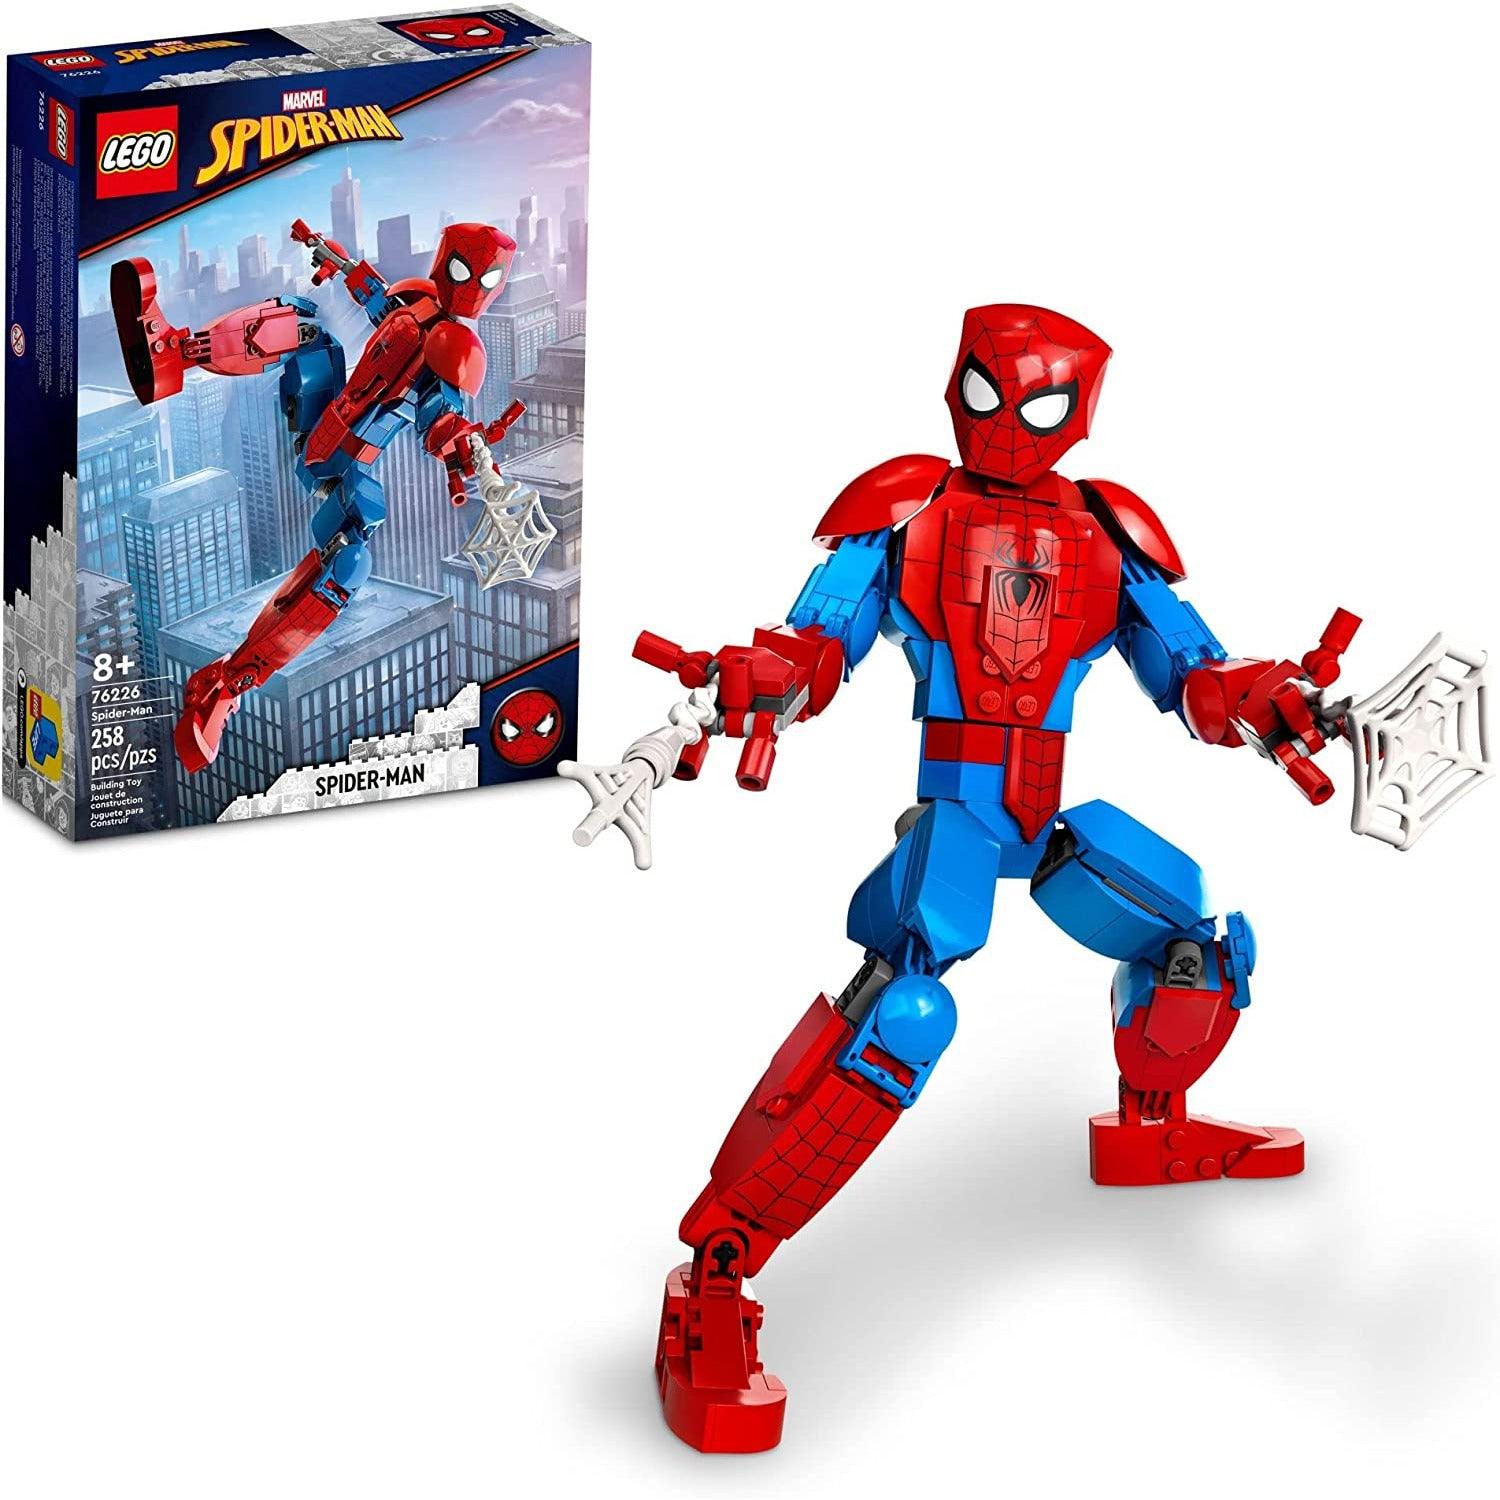 LEGO 76226 Marvel Super Heroes Spider-Man Figure (258 Pieces) - BumbleToys - 14 Years & Up, 8+ Years, Boys, LEGO, Marvel, OXE, Pre-Order